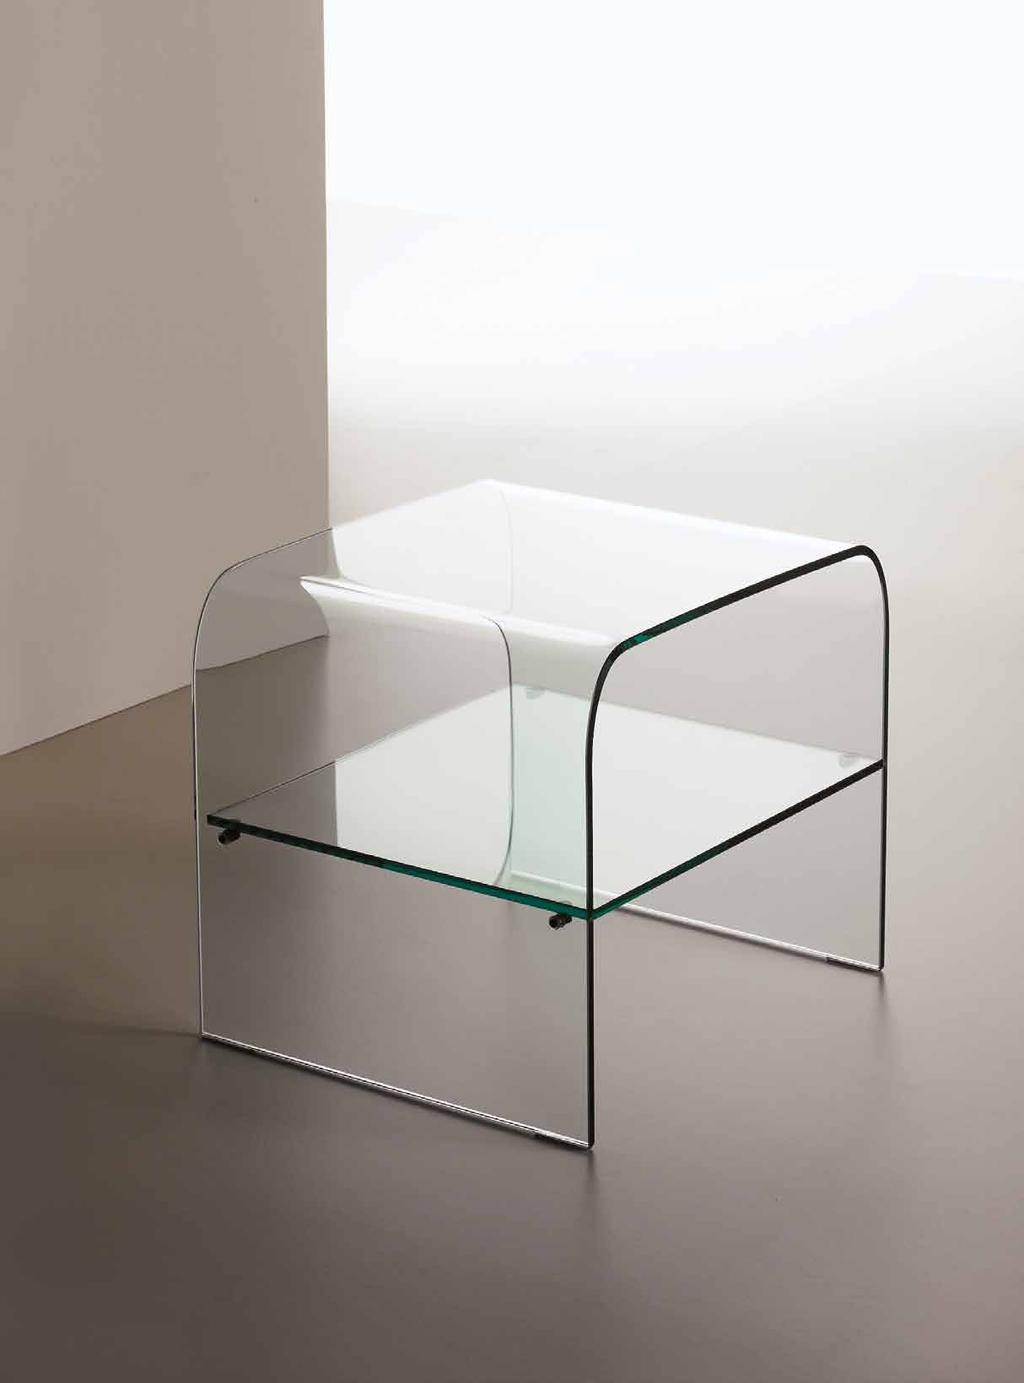 Bedside-table 045 of bended glass mm. 10, cm. 52x45x45 h.